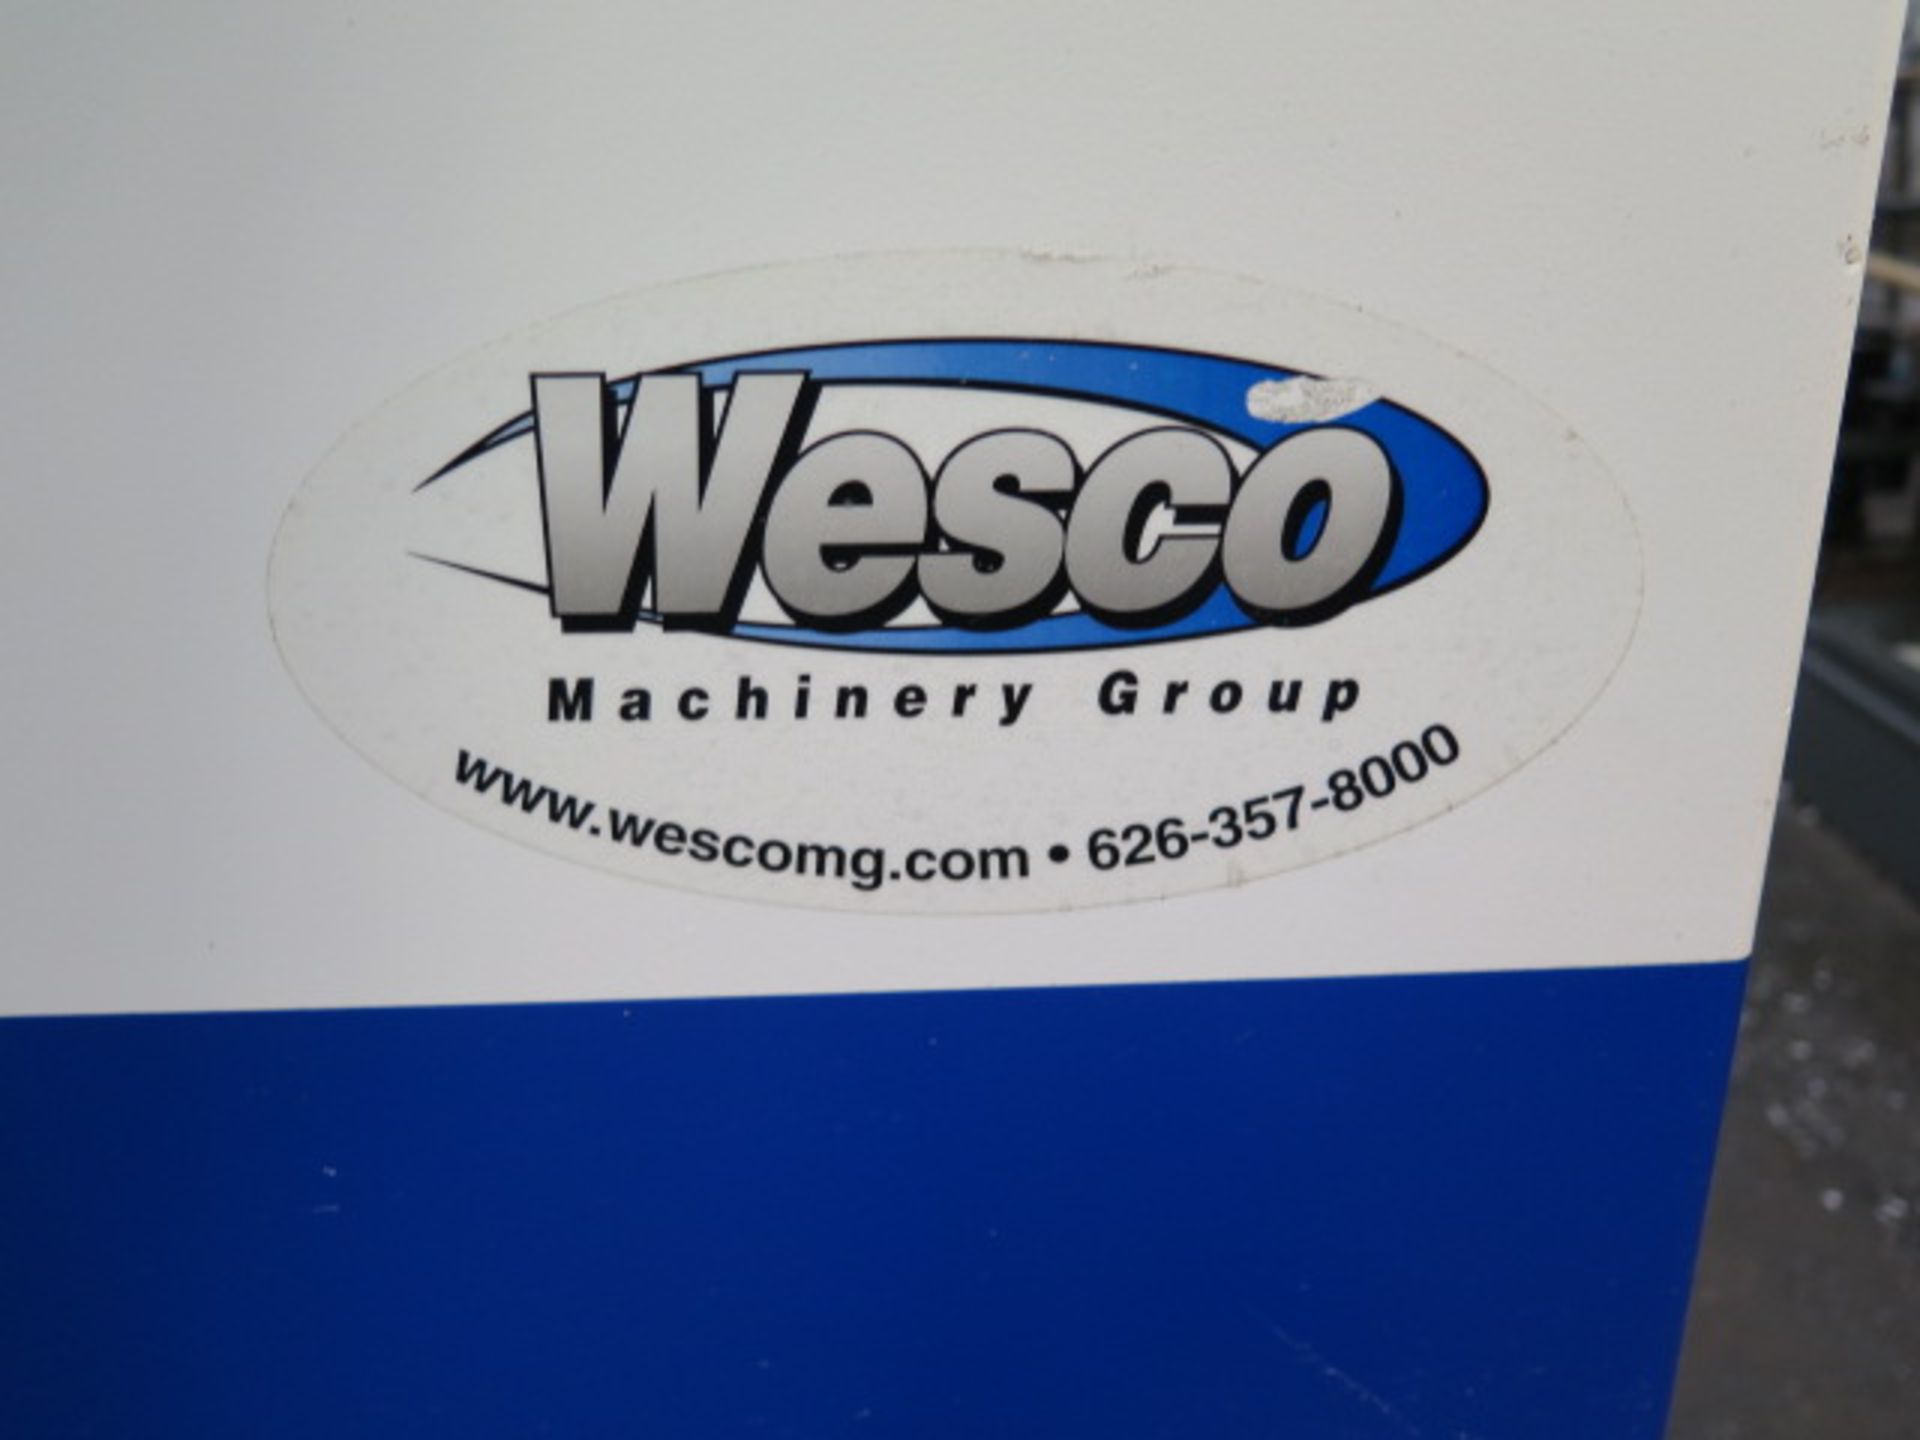 2013 Fadal VMC4020 CNC Vertical Machining Center s/n 1303070690 ( Wesco Factory Rebuilt in 2013 ) w/ - Image 9 of 12